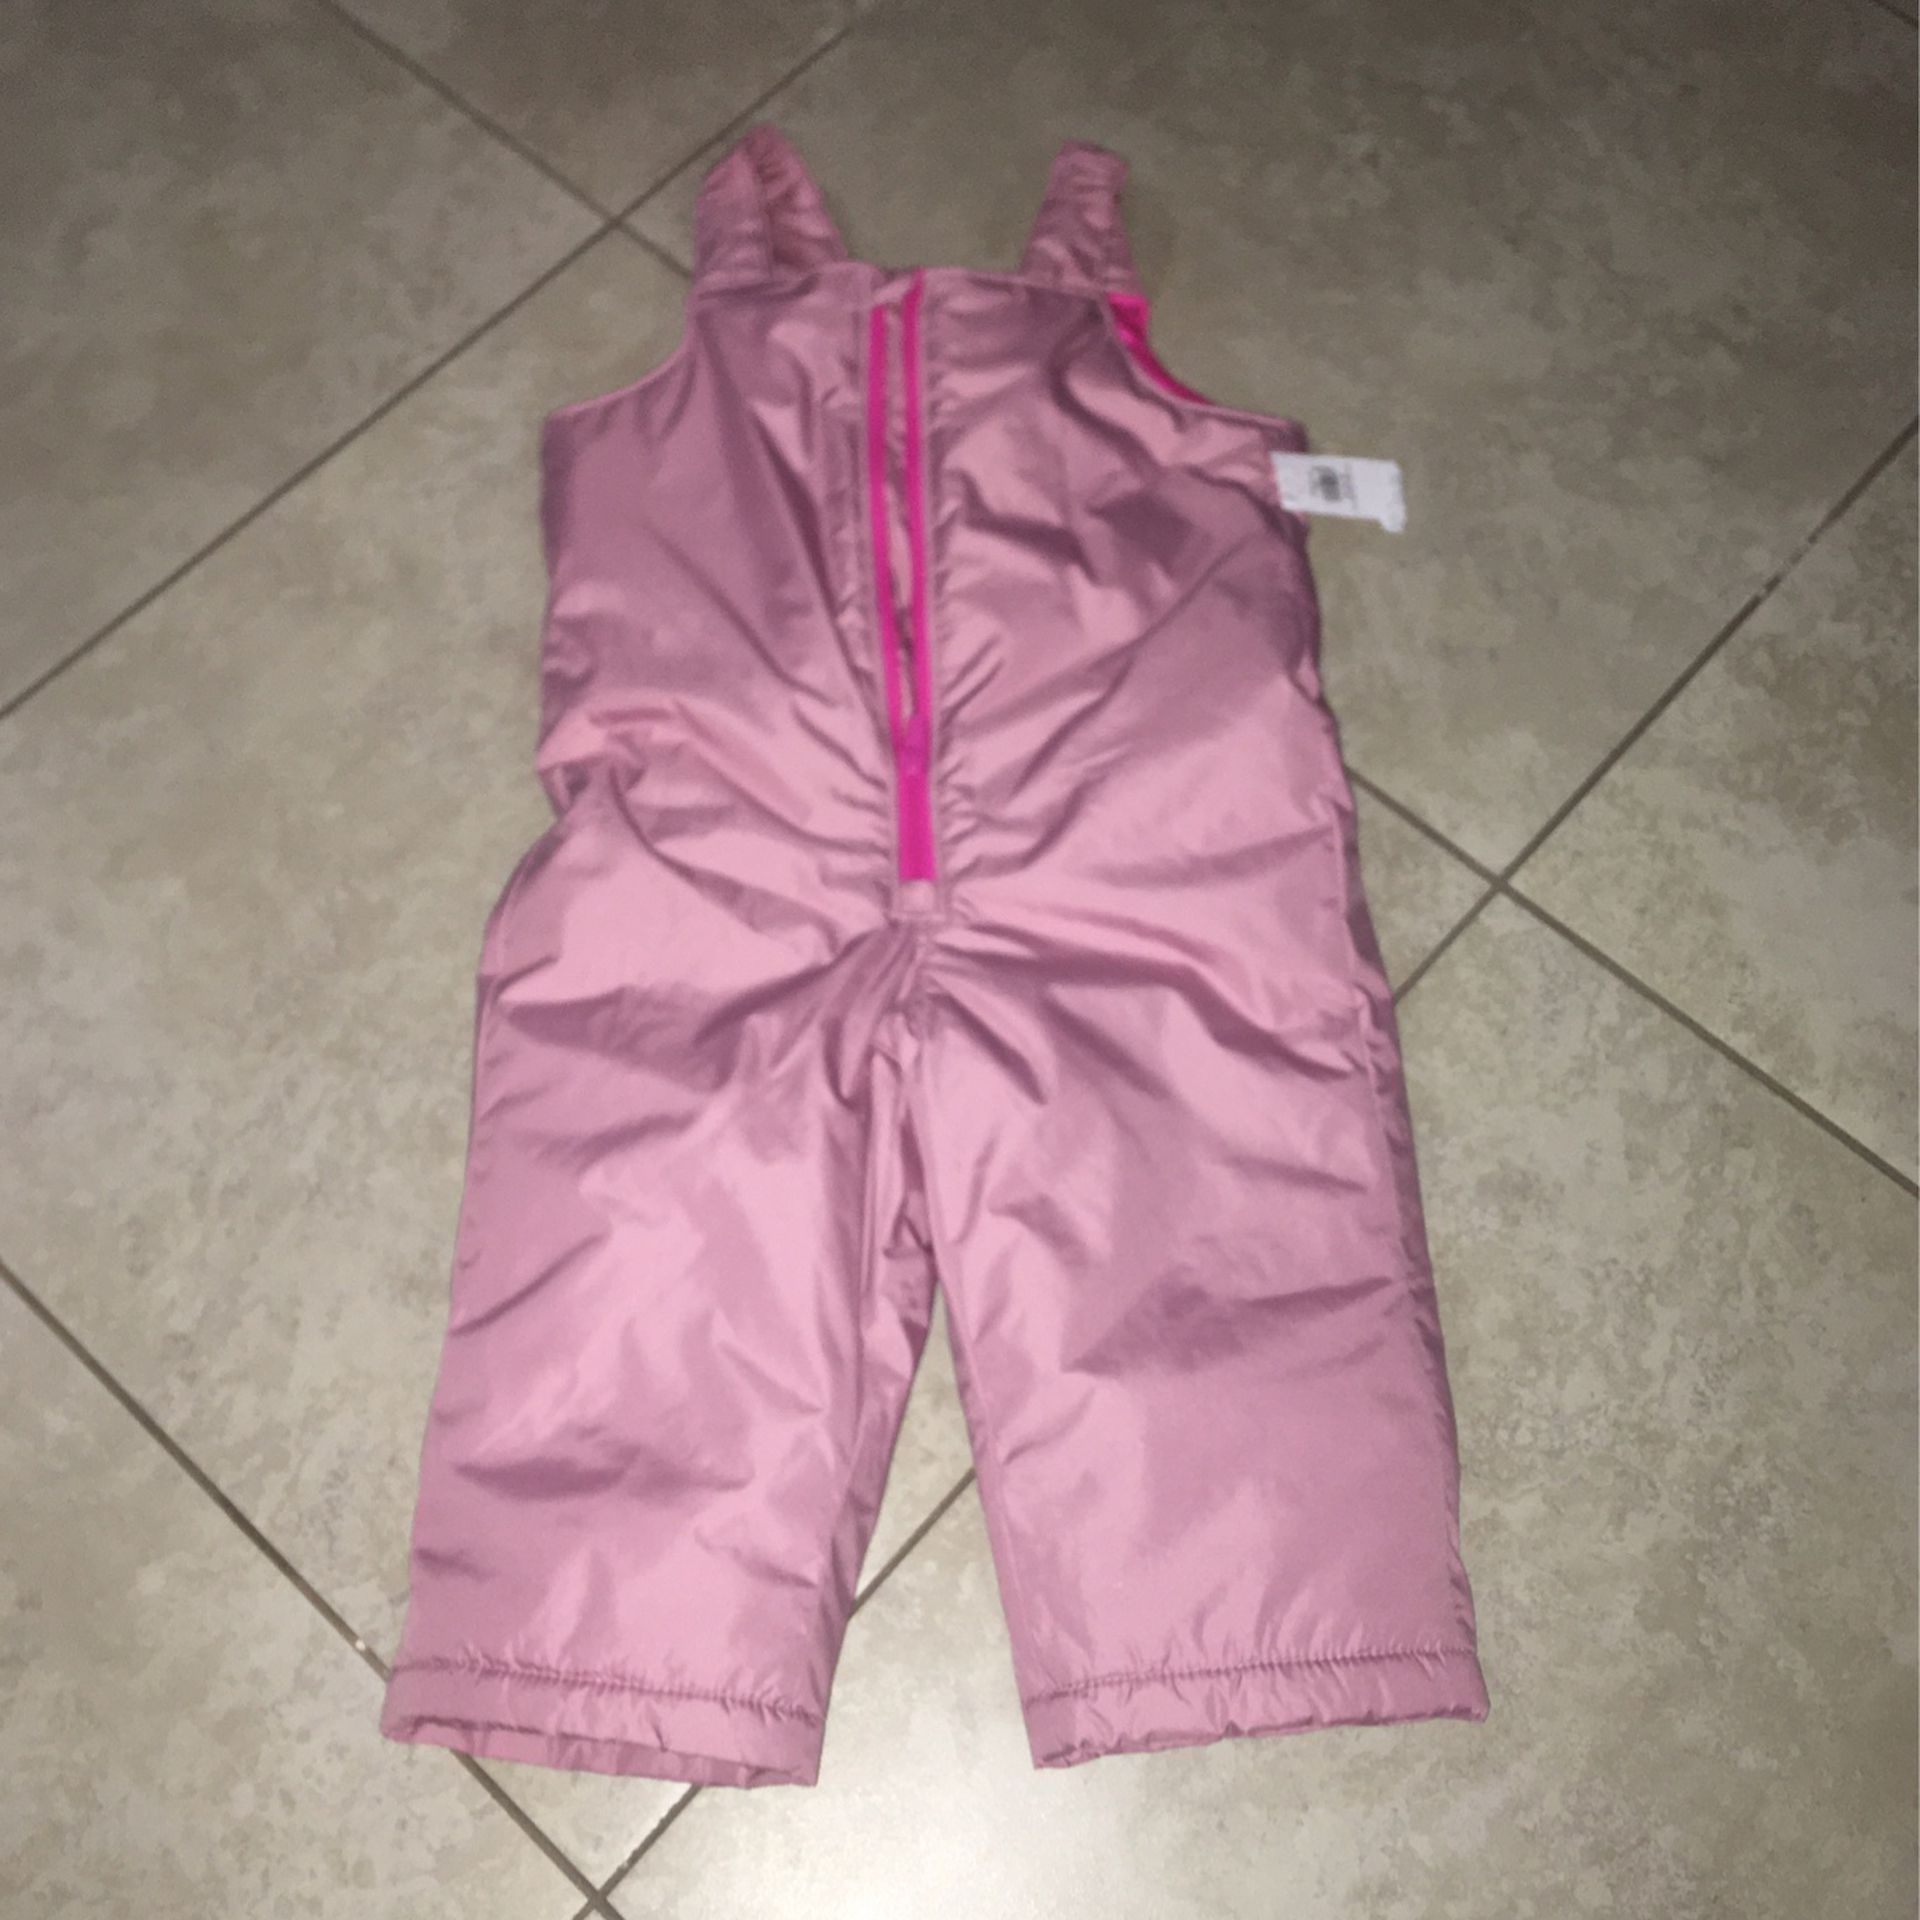 Old Navy Toddler Girl’s Water Resistant Pink Snow Pants, Size 18-24 Months